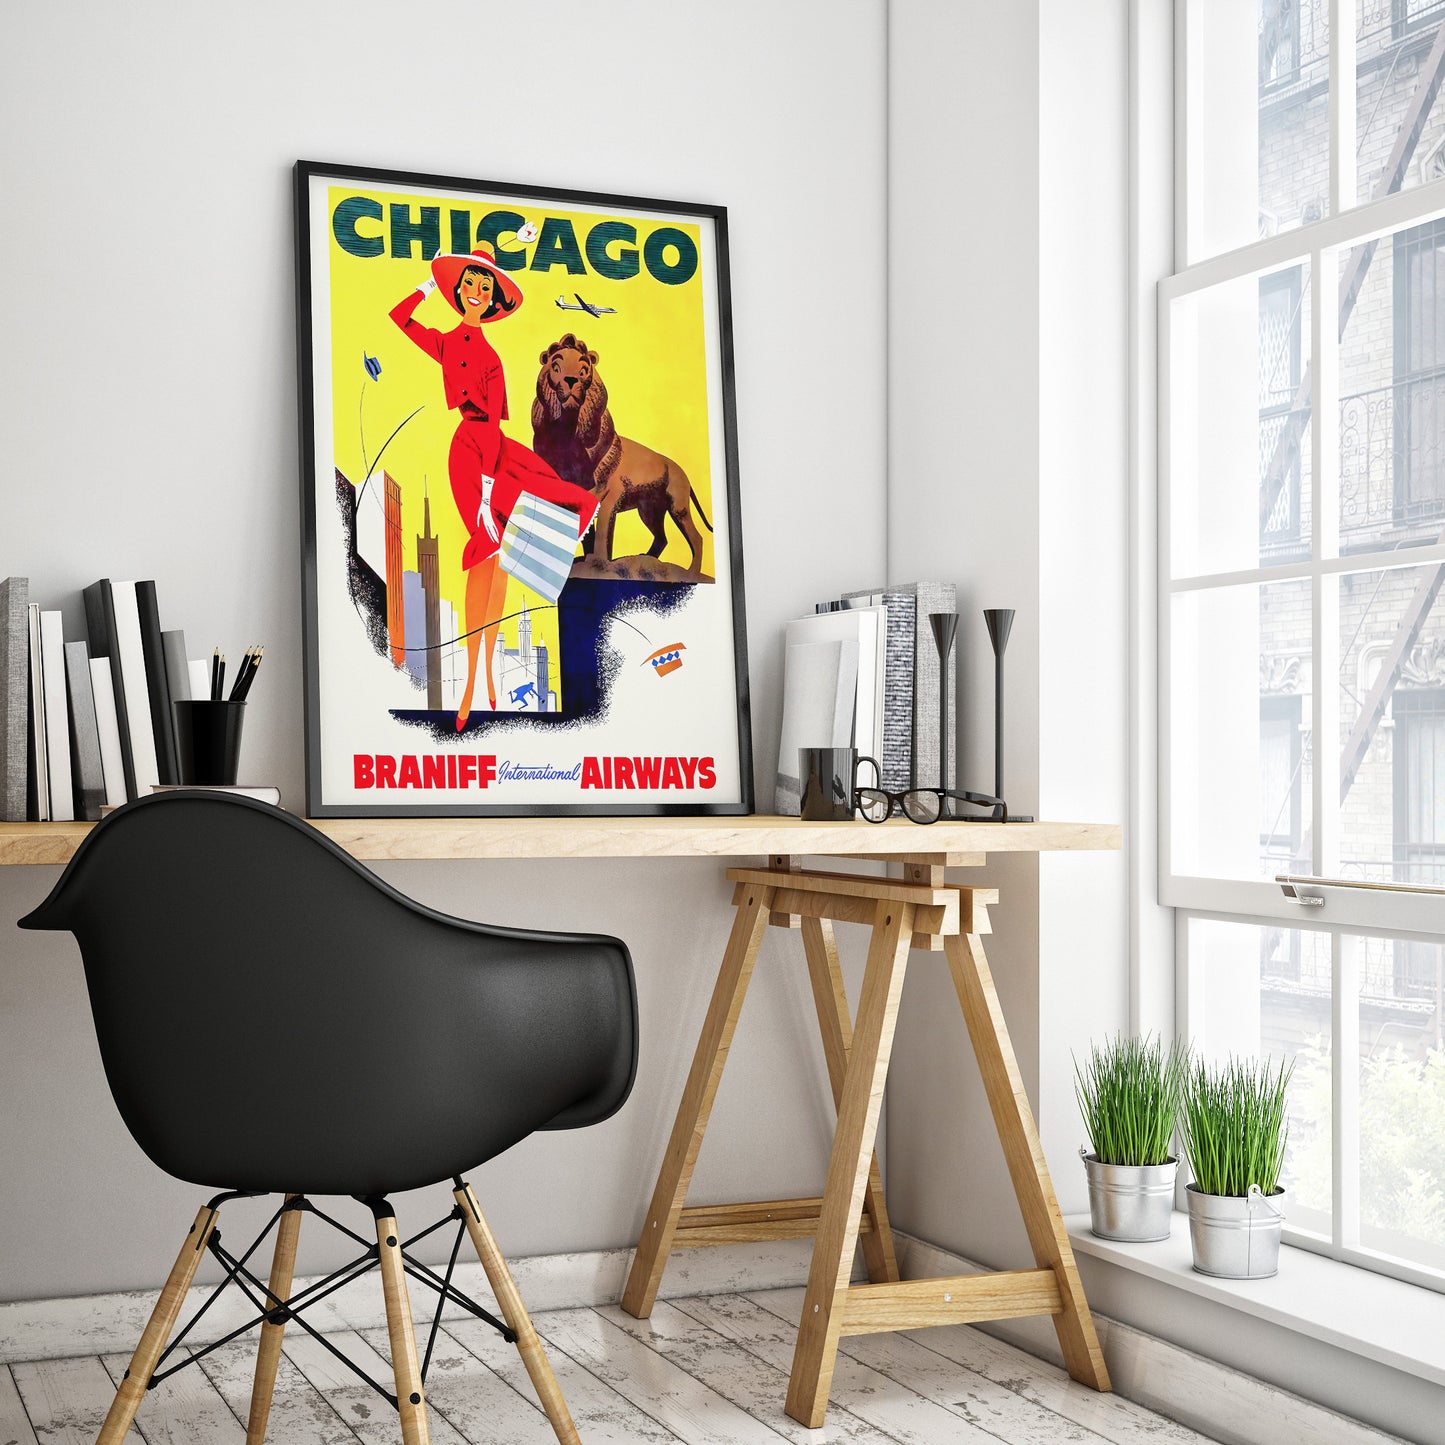 Chicago, the "Windy City" Rejseplakat